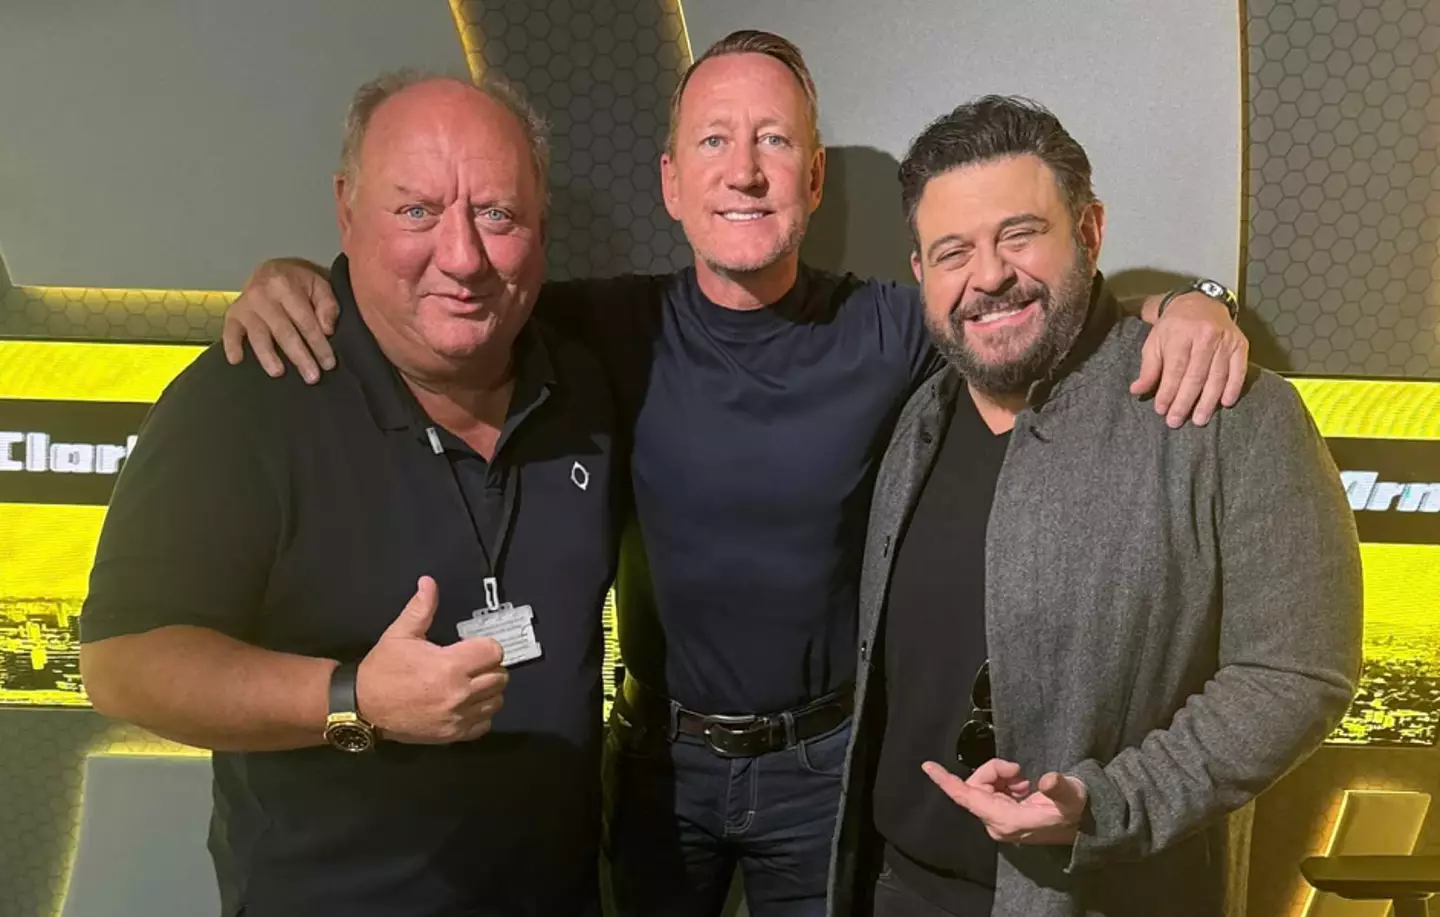 Richman pictured with former footballers Alan Brazil and Ray Parlour.